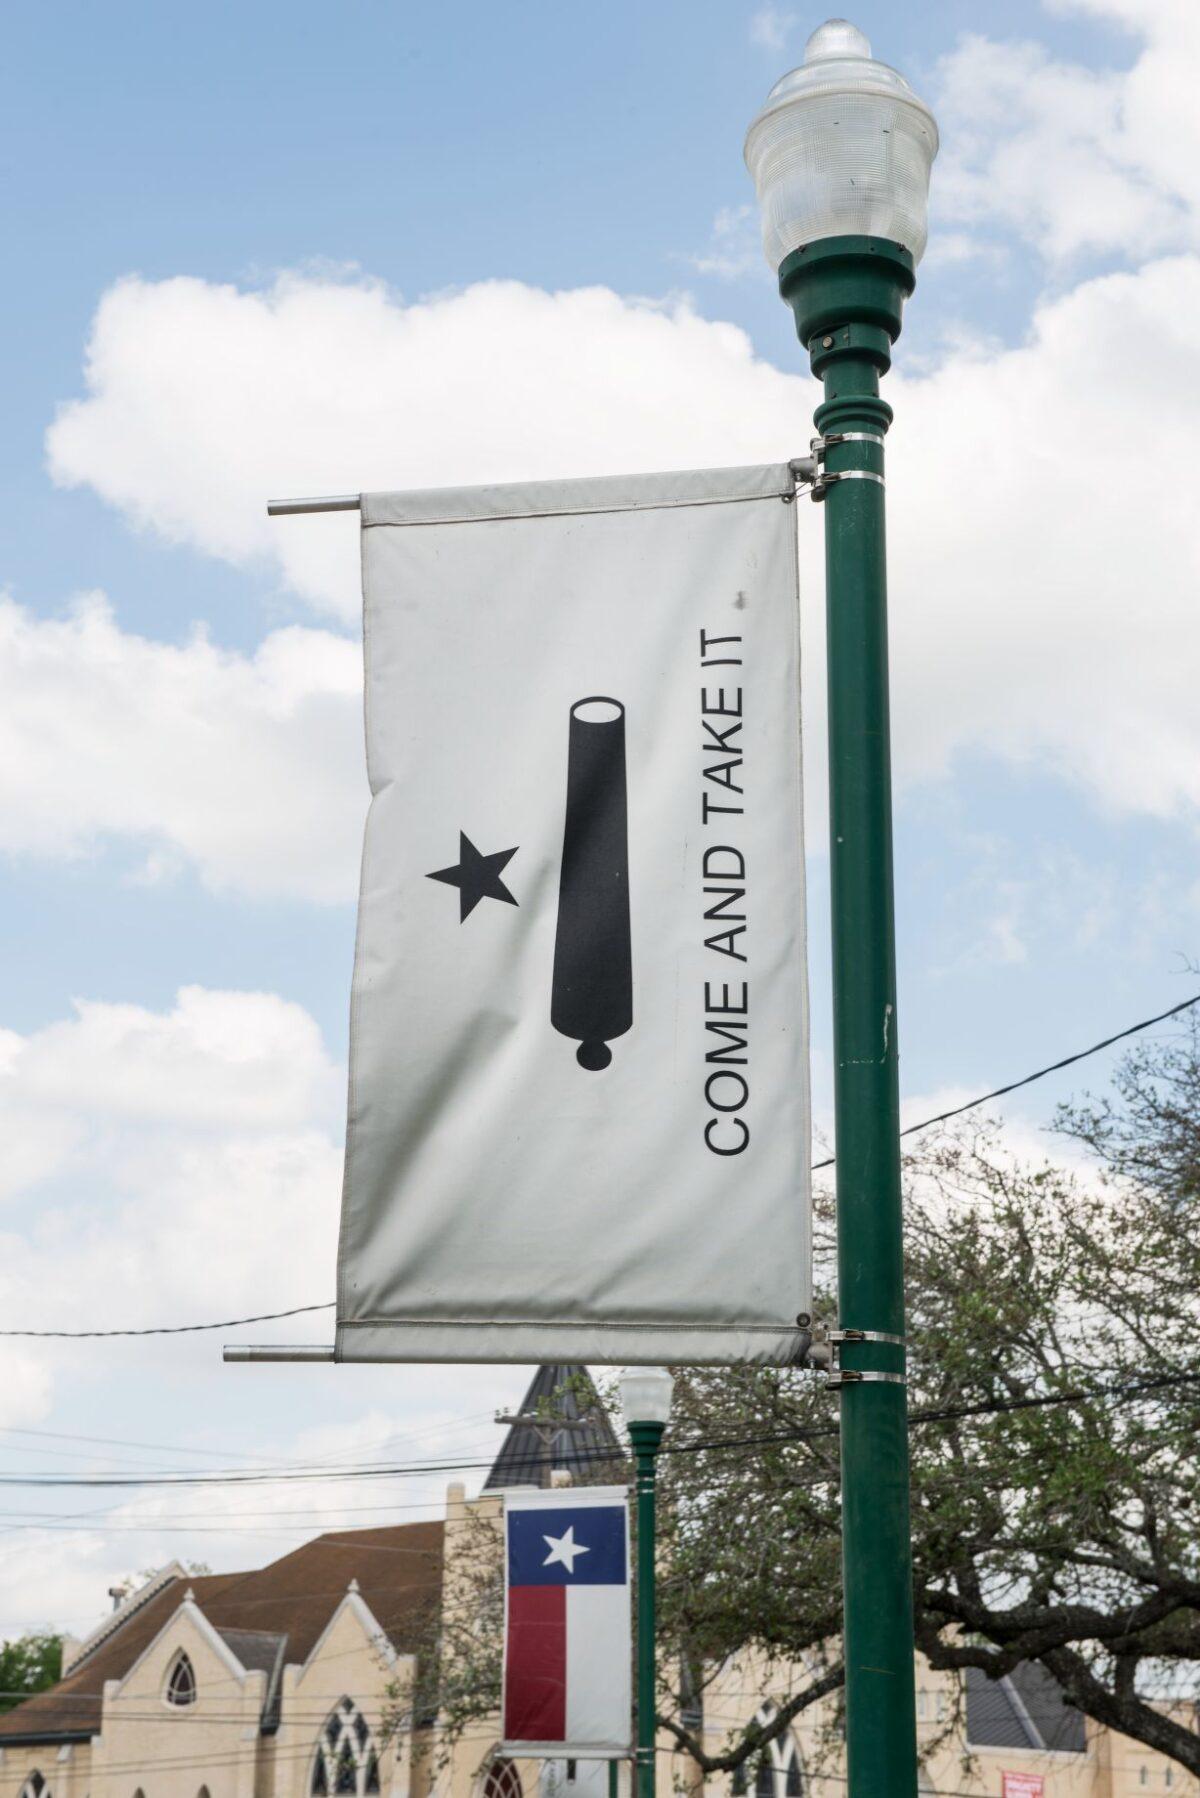 This file photo taken in 2014 shows a modern-day replica of the "Come and Take It" flag in Gonzales, Texas. (Carol M. Highsmith/Library of Congress)